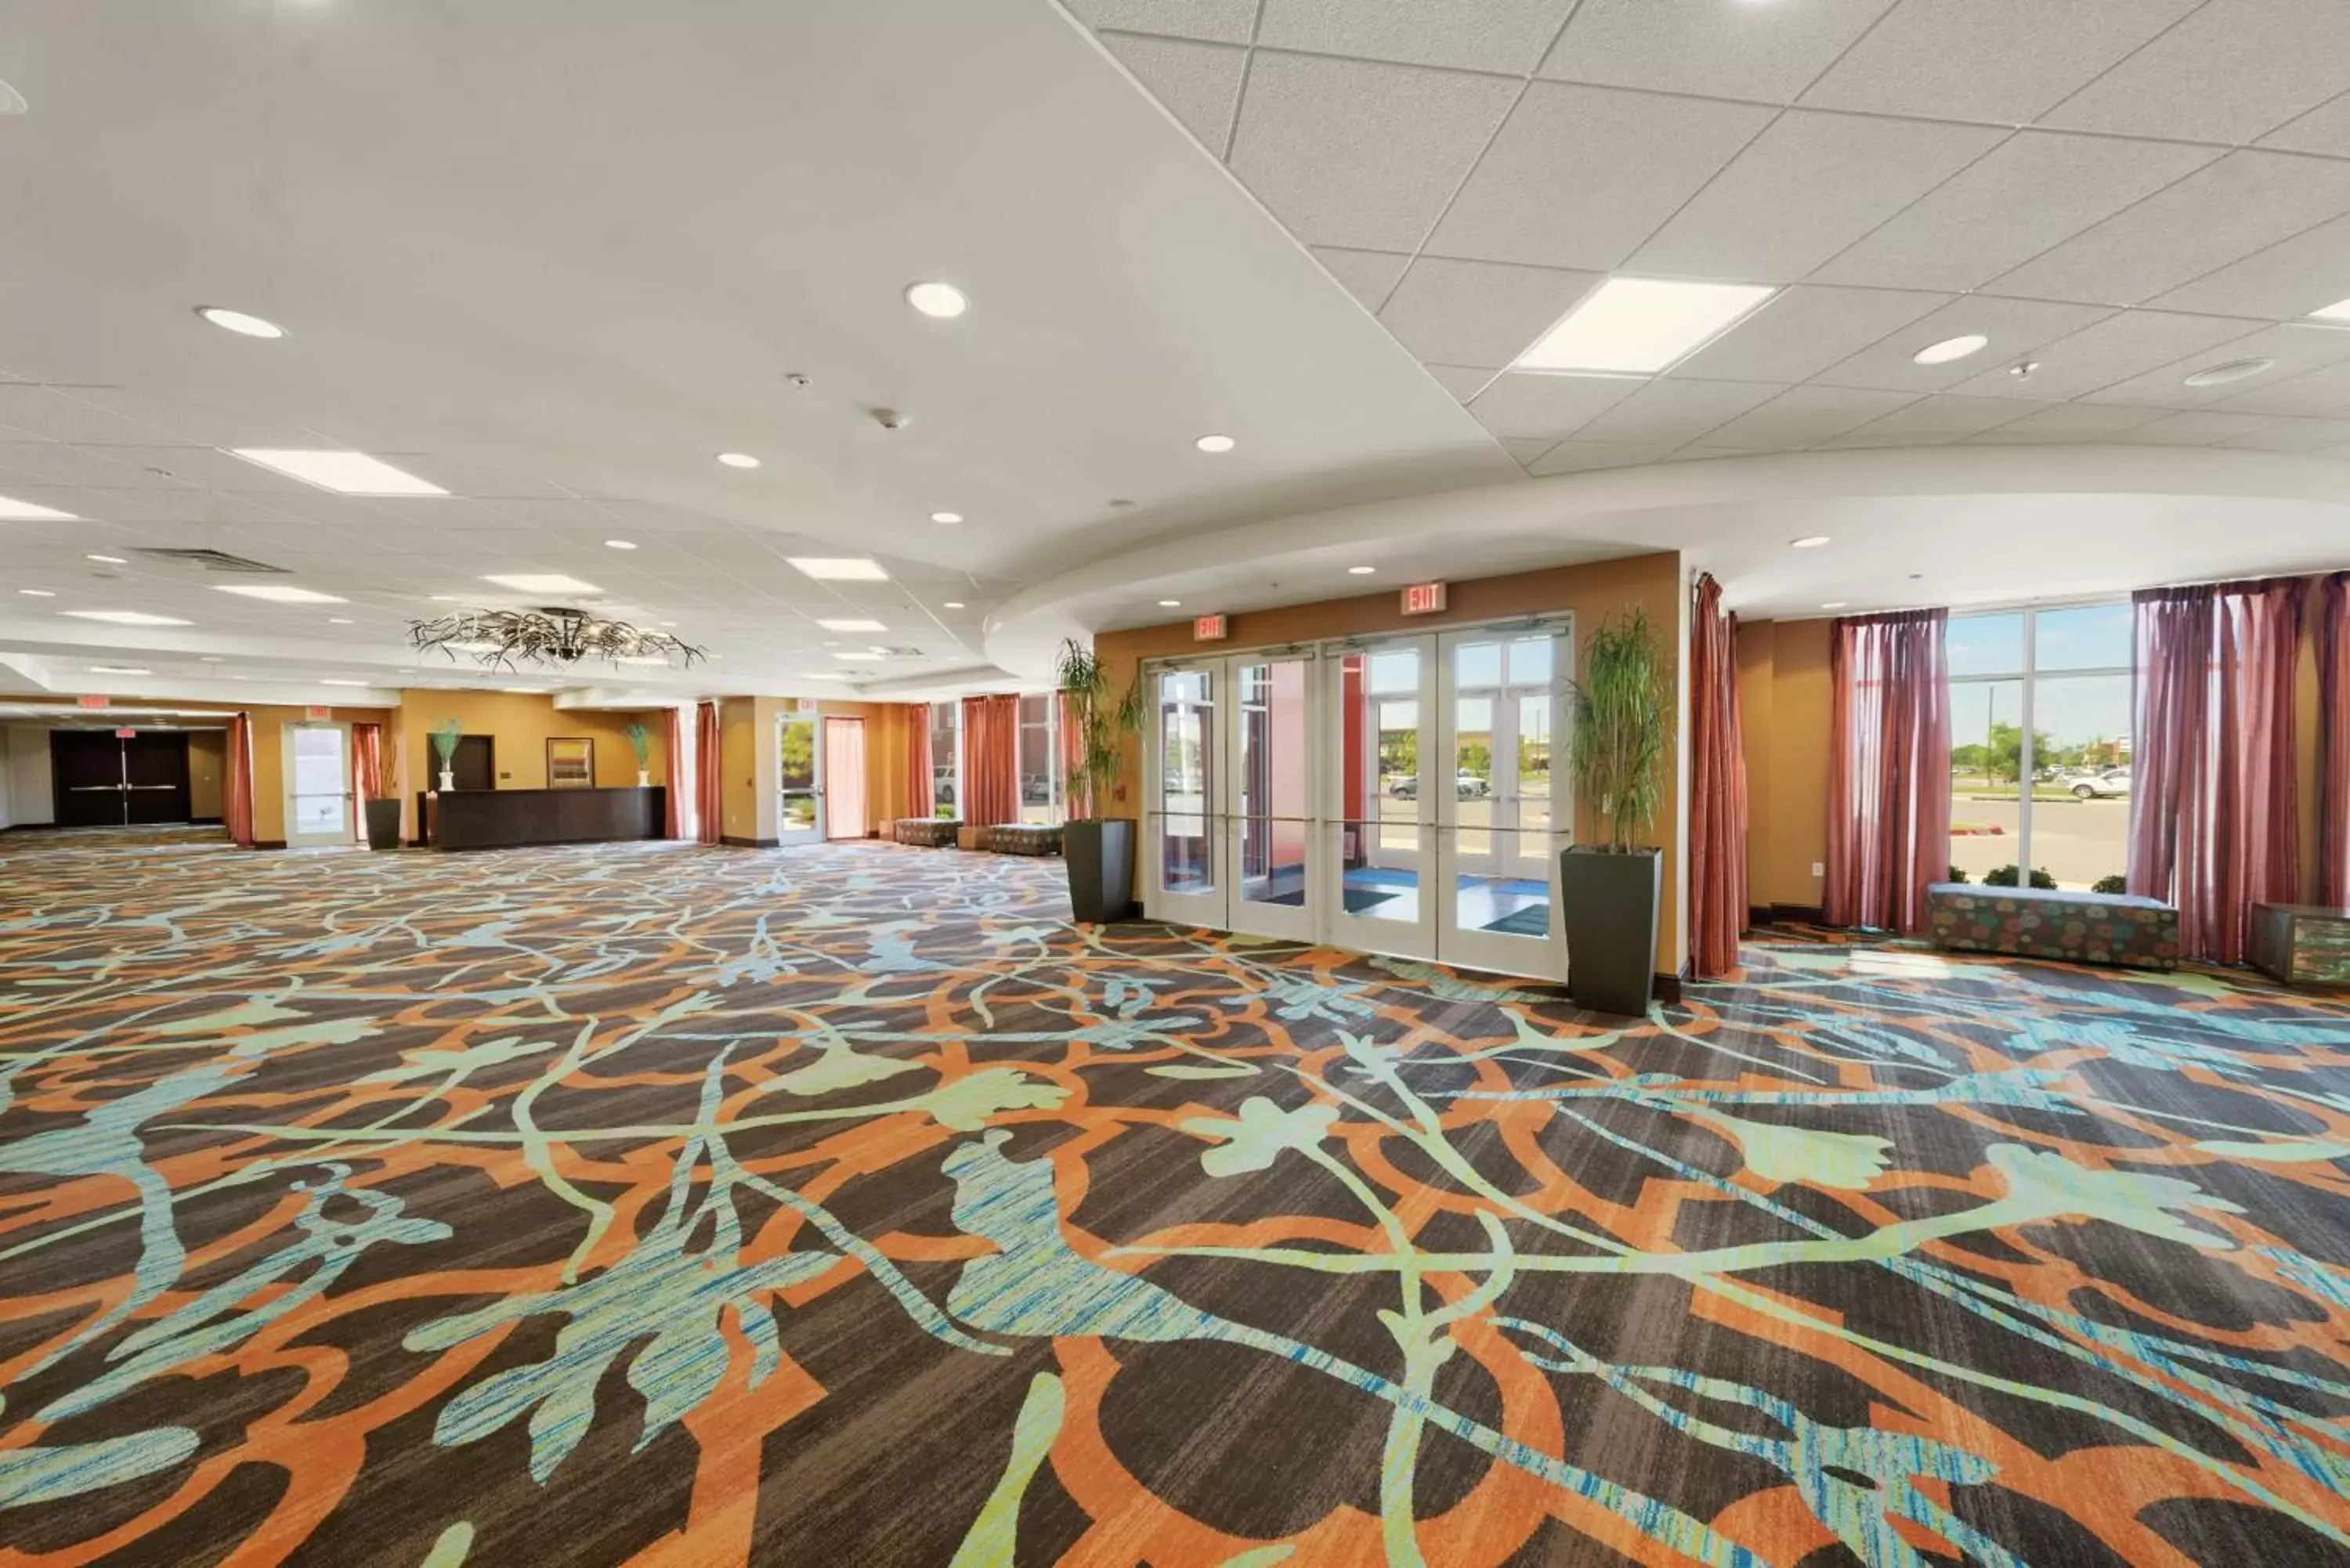 Meeting/conference room, Banquet Facilities in Hilton Garden Inn Lawton-Fort Sill